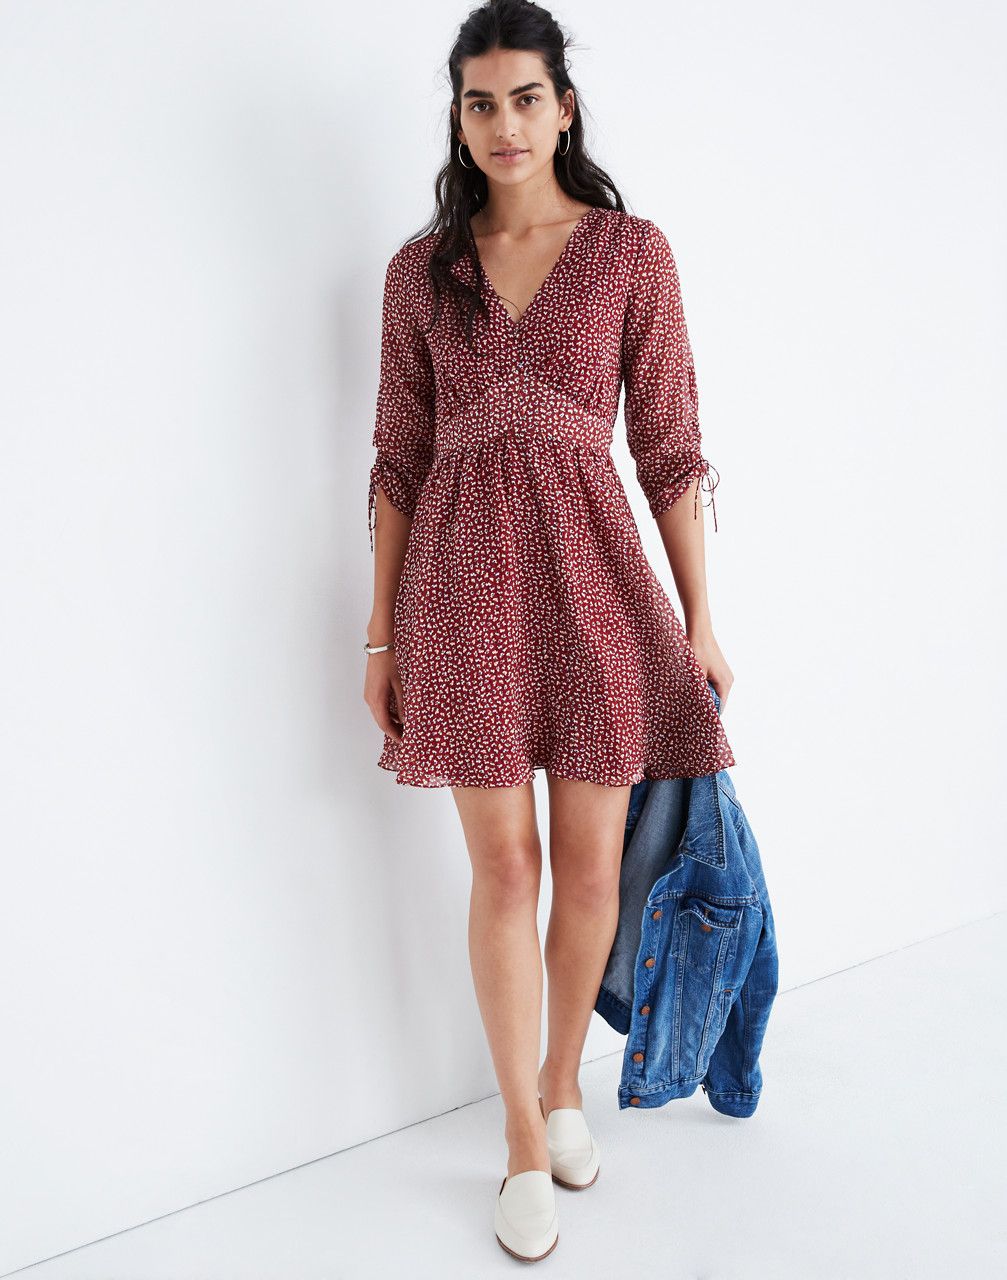 Starviolet Mini Dress in Ditsy Flowers | Madewell